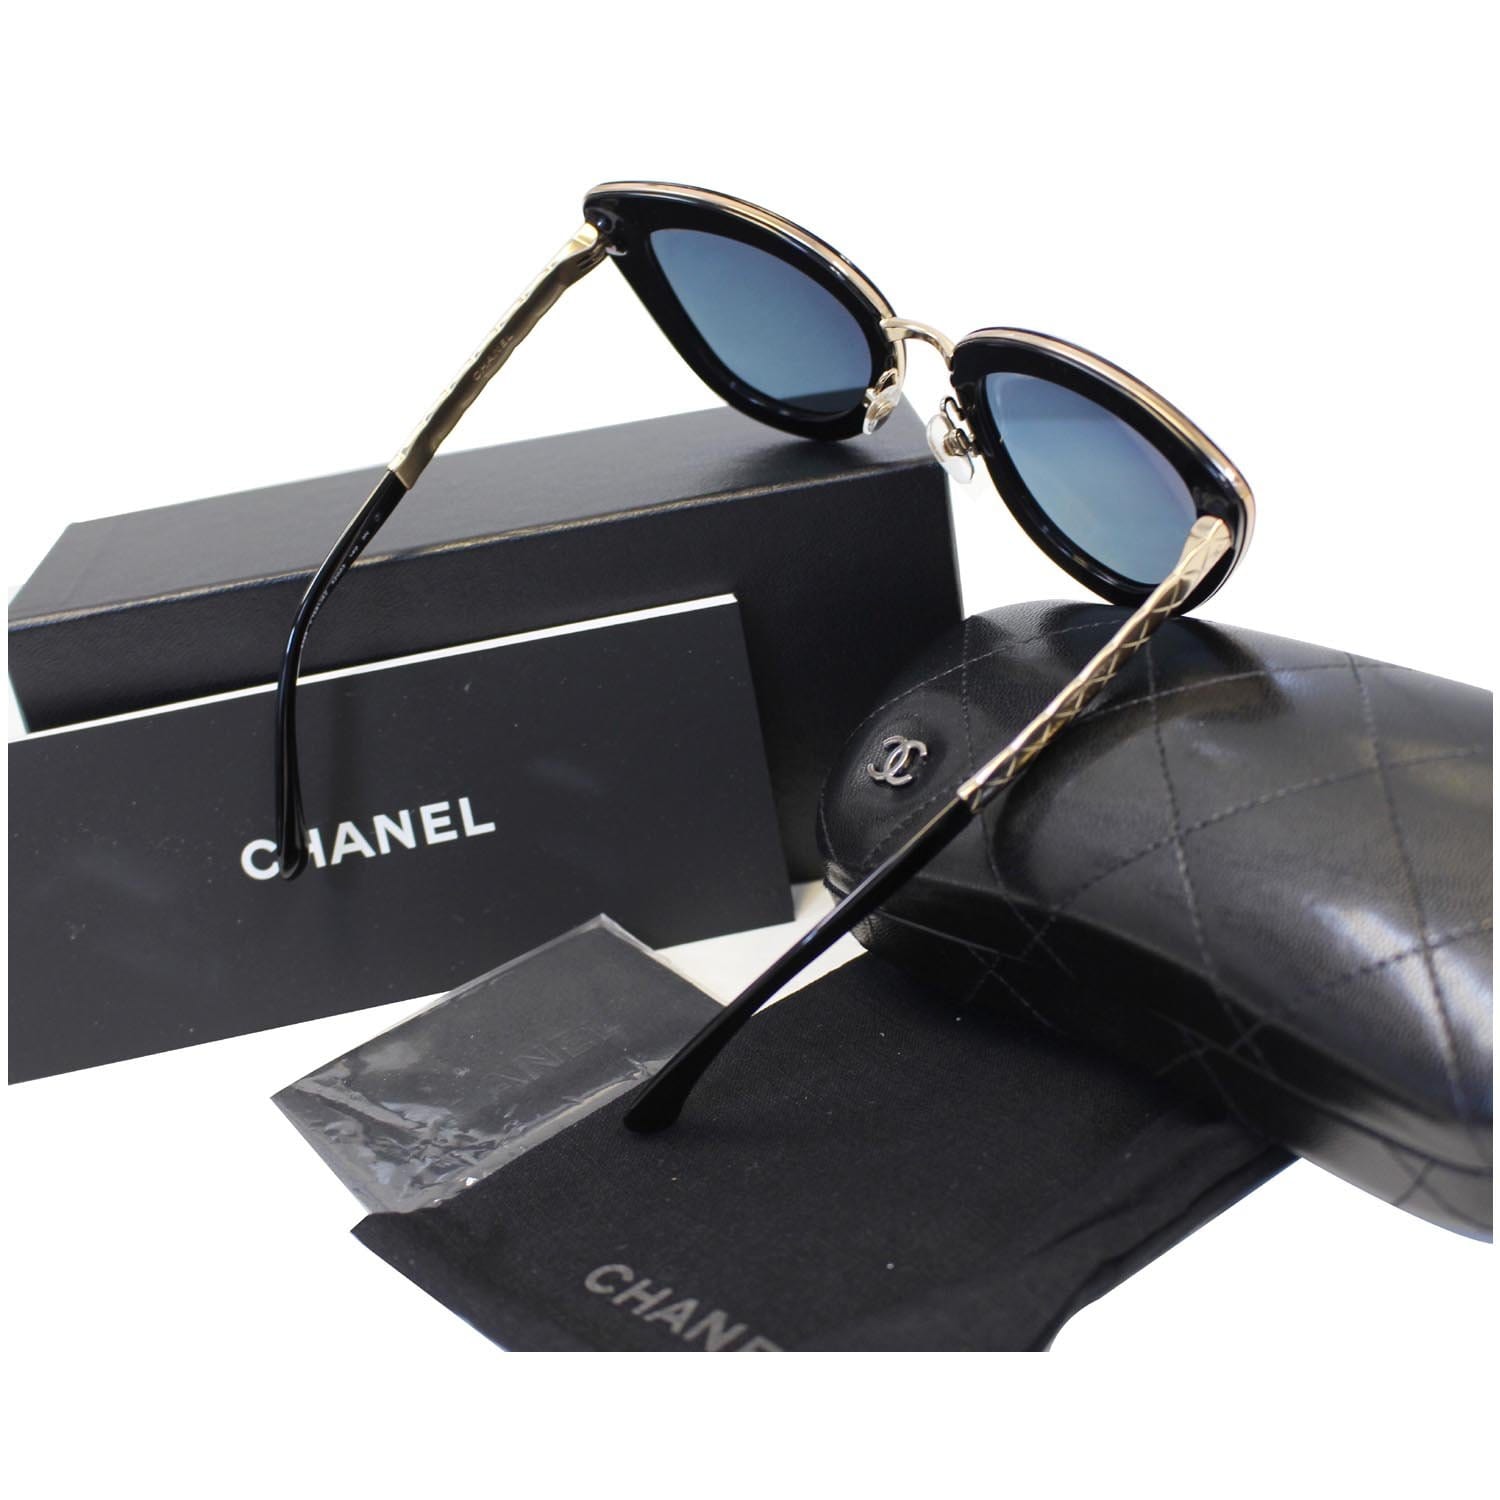 Chanel Cat Eye Sunglasses - Acetate and Tweed, Black and Gold - Polarized - UV Protected - Women's Sunglasses - 9129 C622/S4